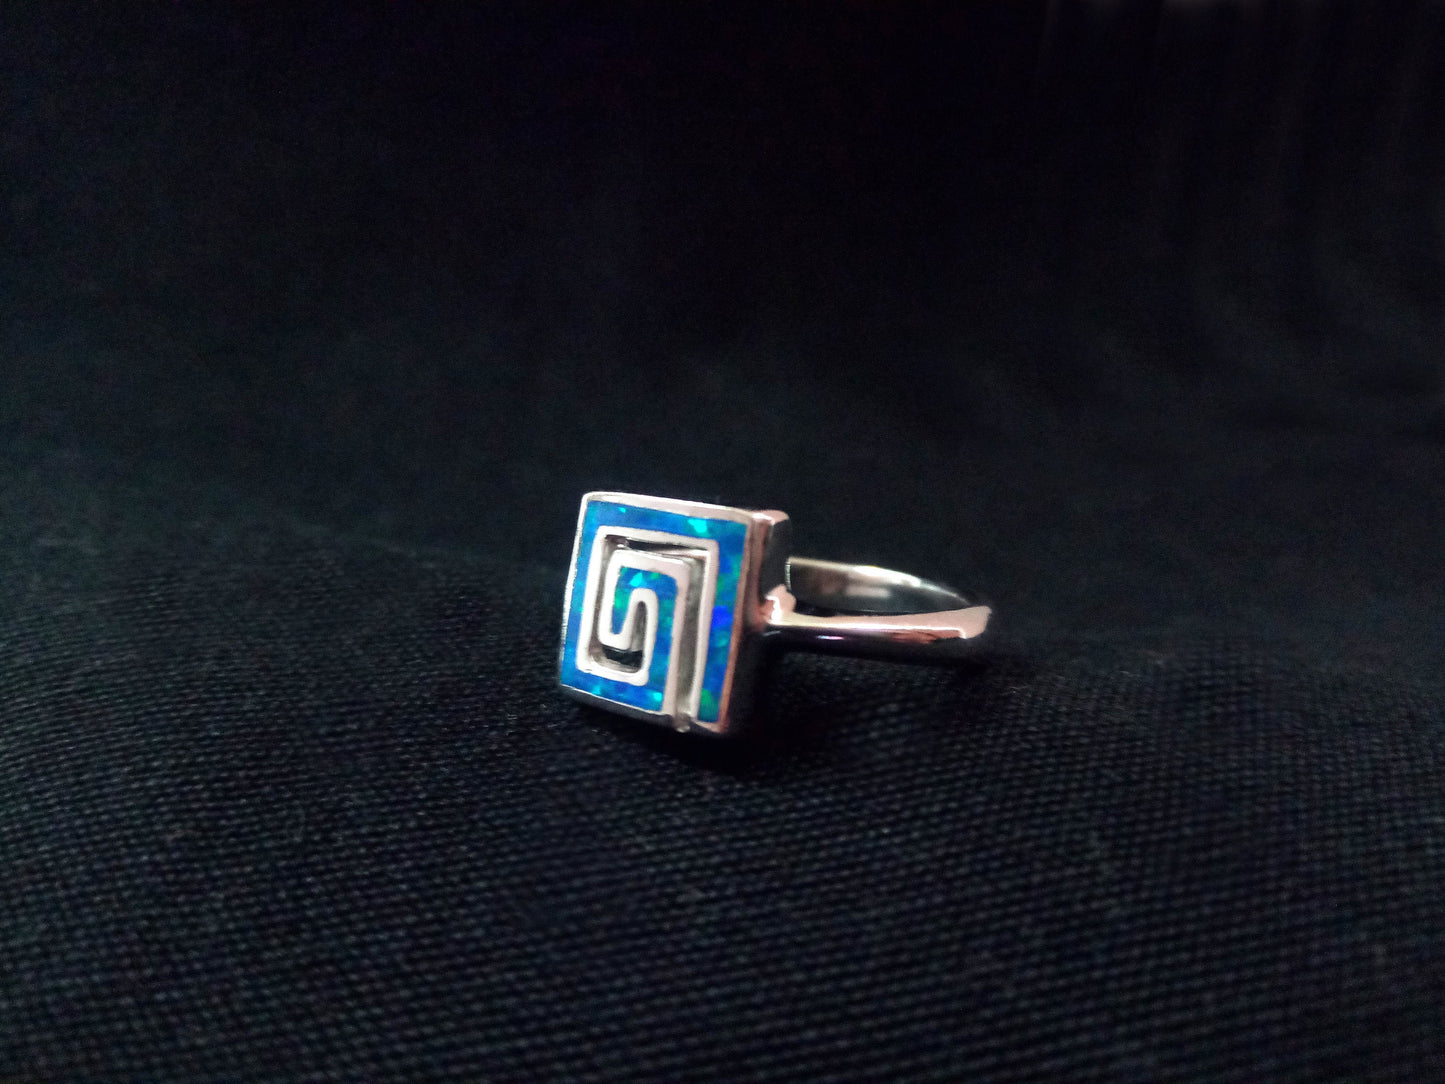 Sterling Silver 925 Meander Opal Square Ring, Greek Key Blue Opal Ring US8 , Greek Opal Jewelry, Griechisches Opal Silber Ring,Bague Grecque